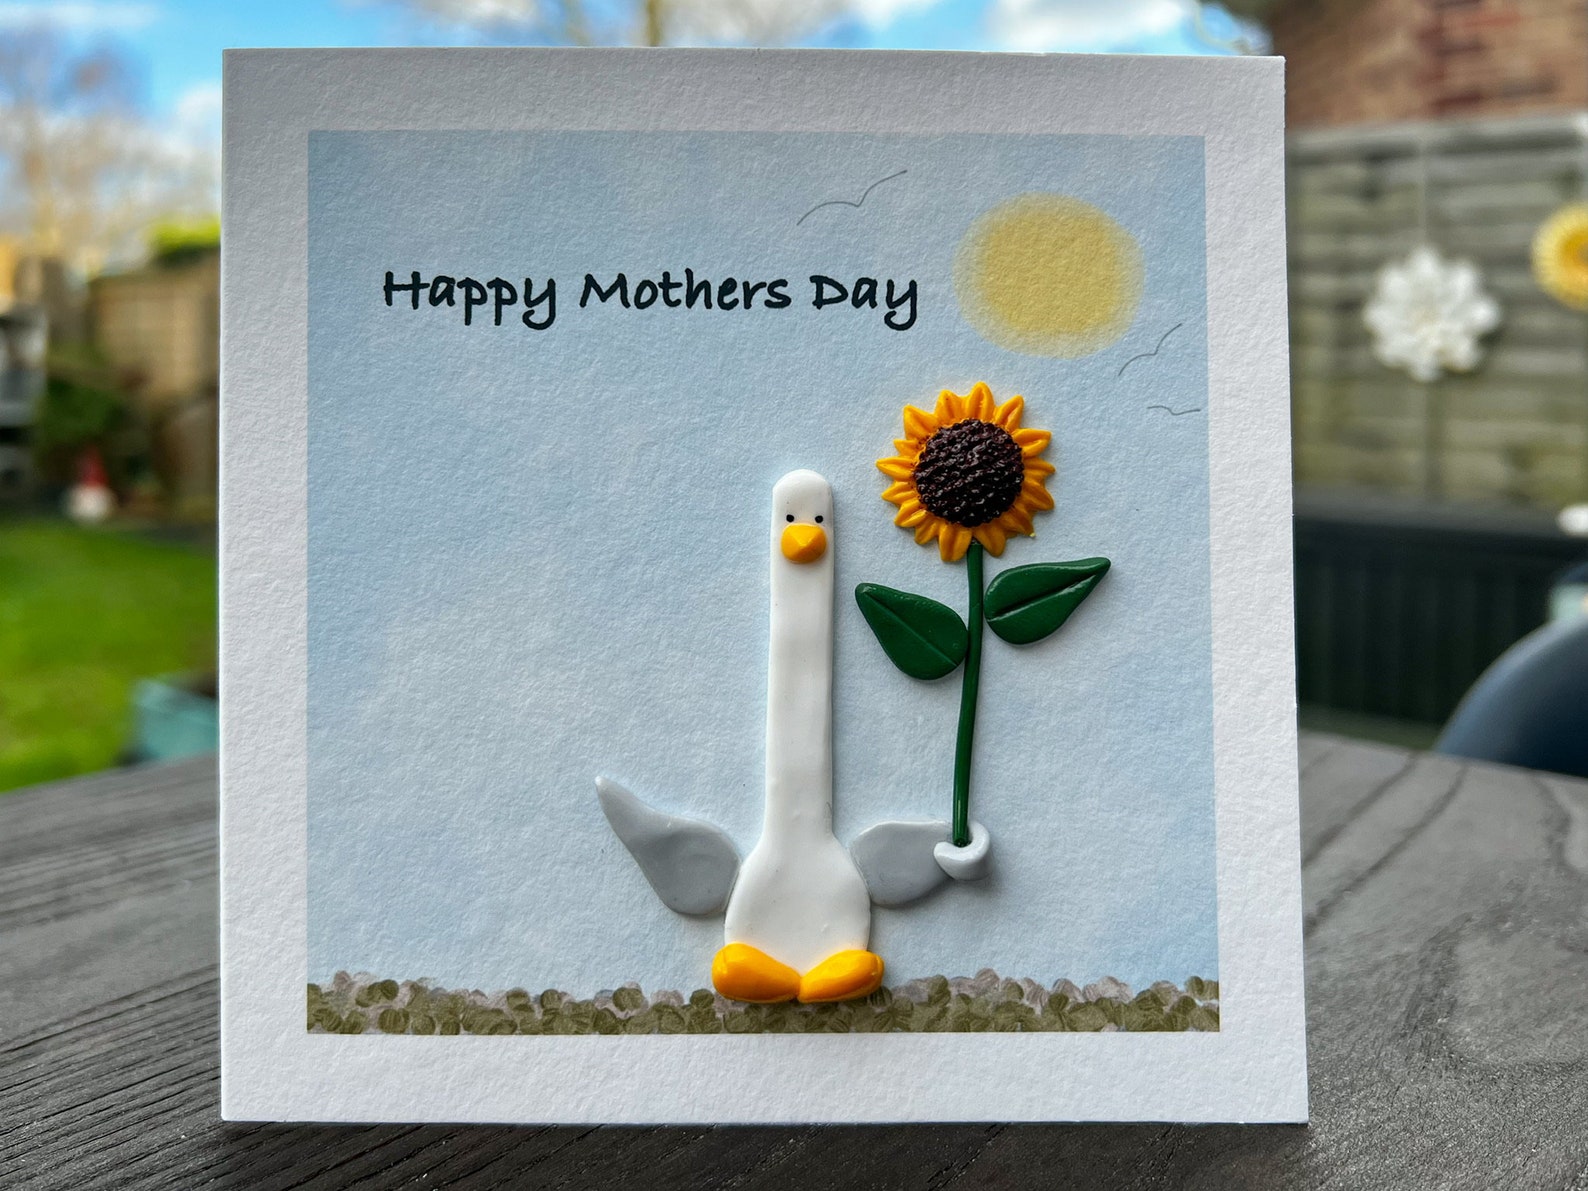 Seagull Holding Sunflower Mother's Day Card